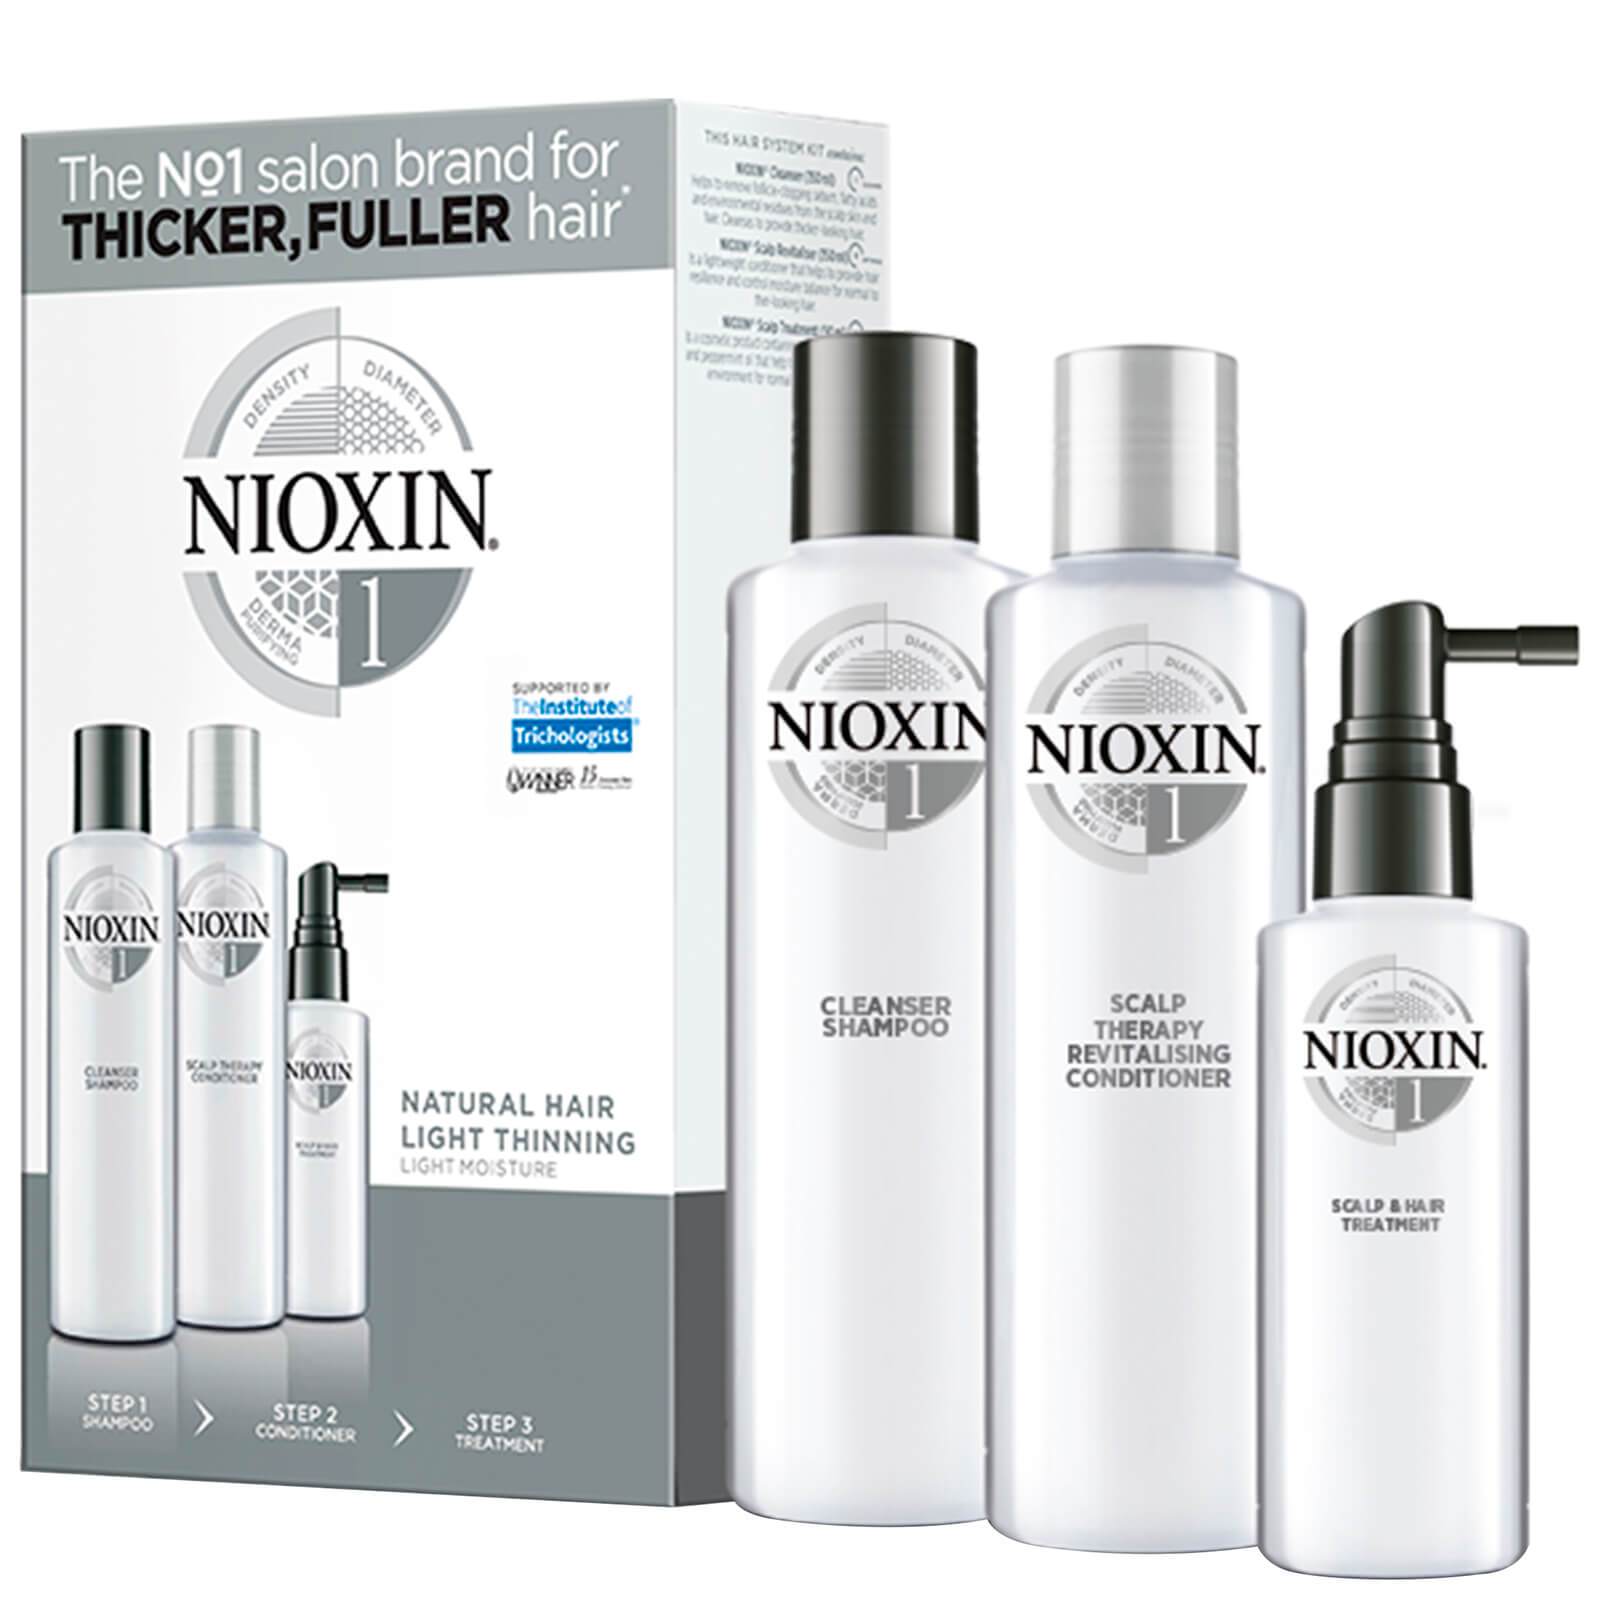 Nioxin Nr.1 Normal To Thin Looking 150ml